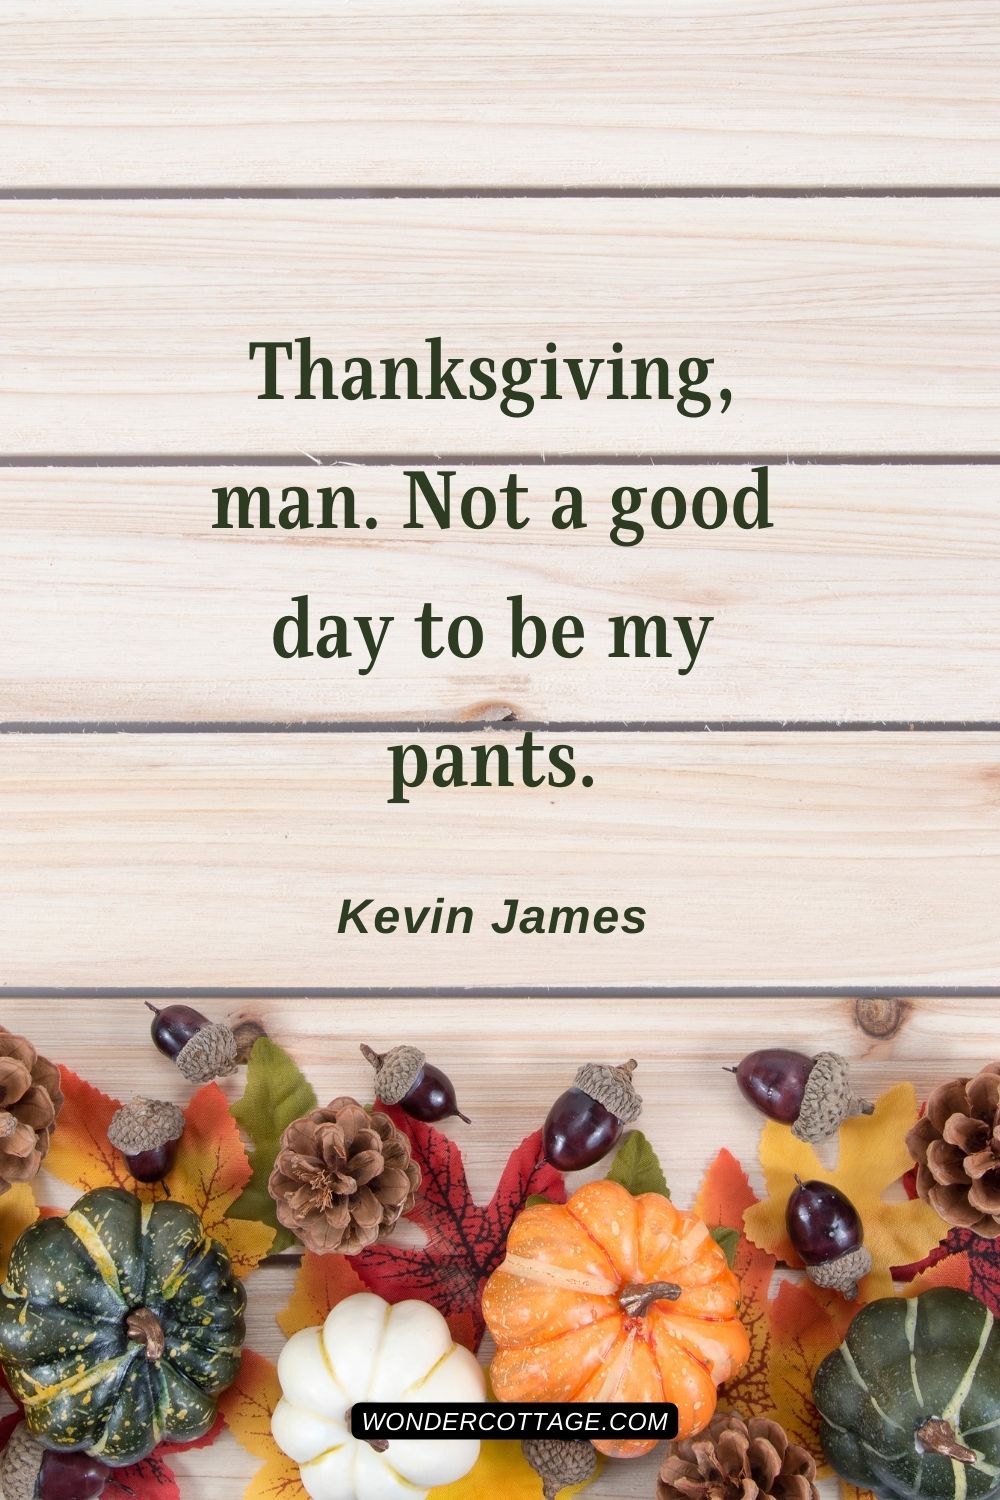 Thanksgiving, man. Not a good day to be my pants. Kevin James